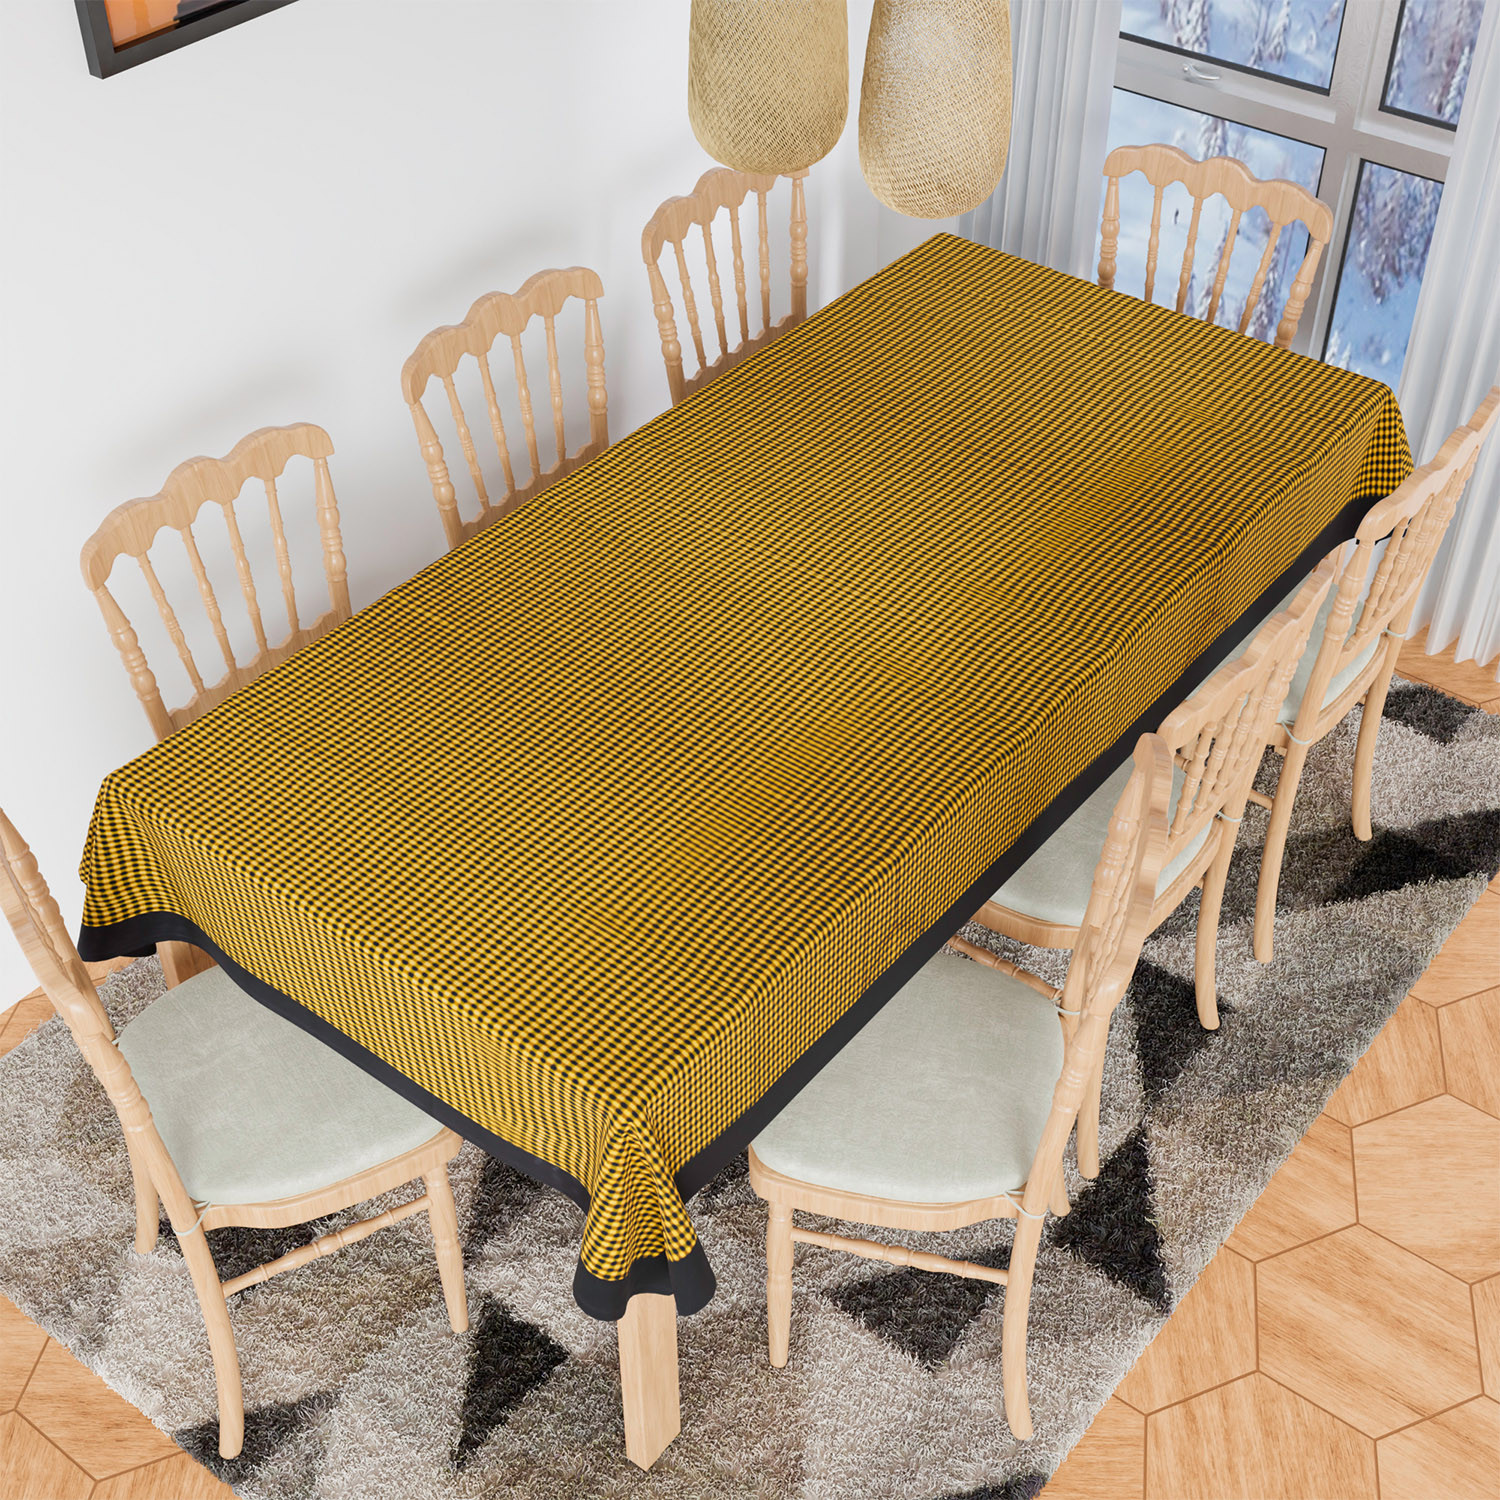 Kuber Industries Dining Table Cover | Cotton Table Cloth Cover | 8 Seater Table Cloth | Barik Check Table Cover | Table Protector | Table Cover for Dining Table | 60x108 Inch | DTC | Yellow